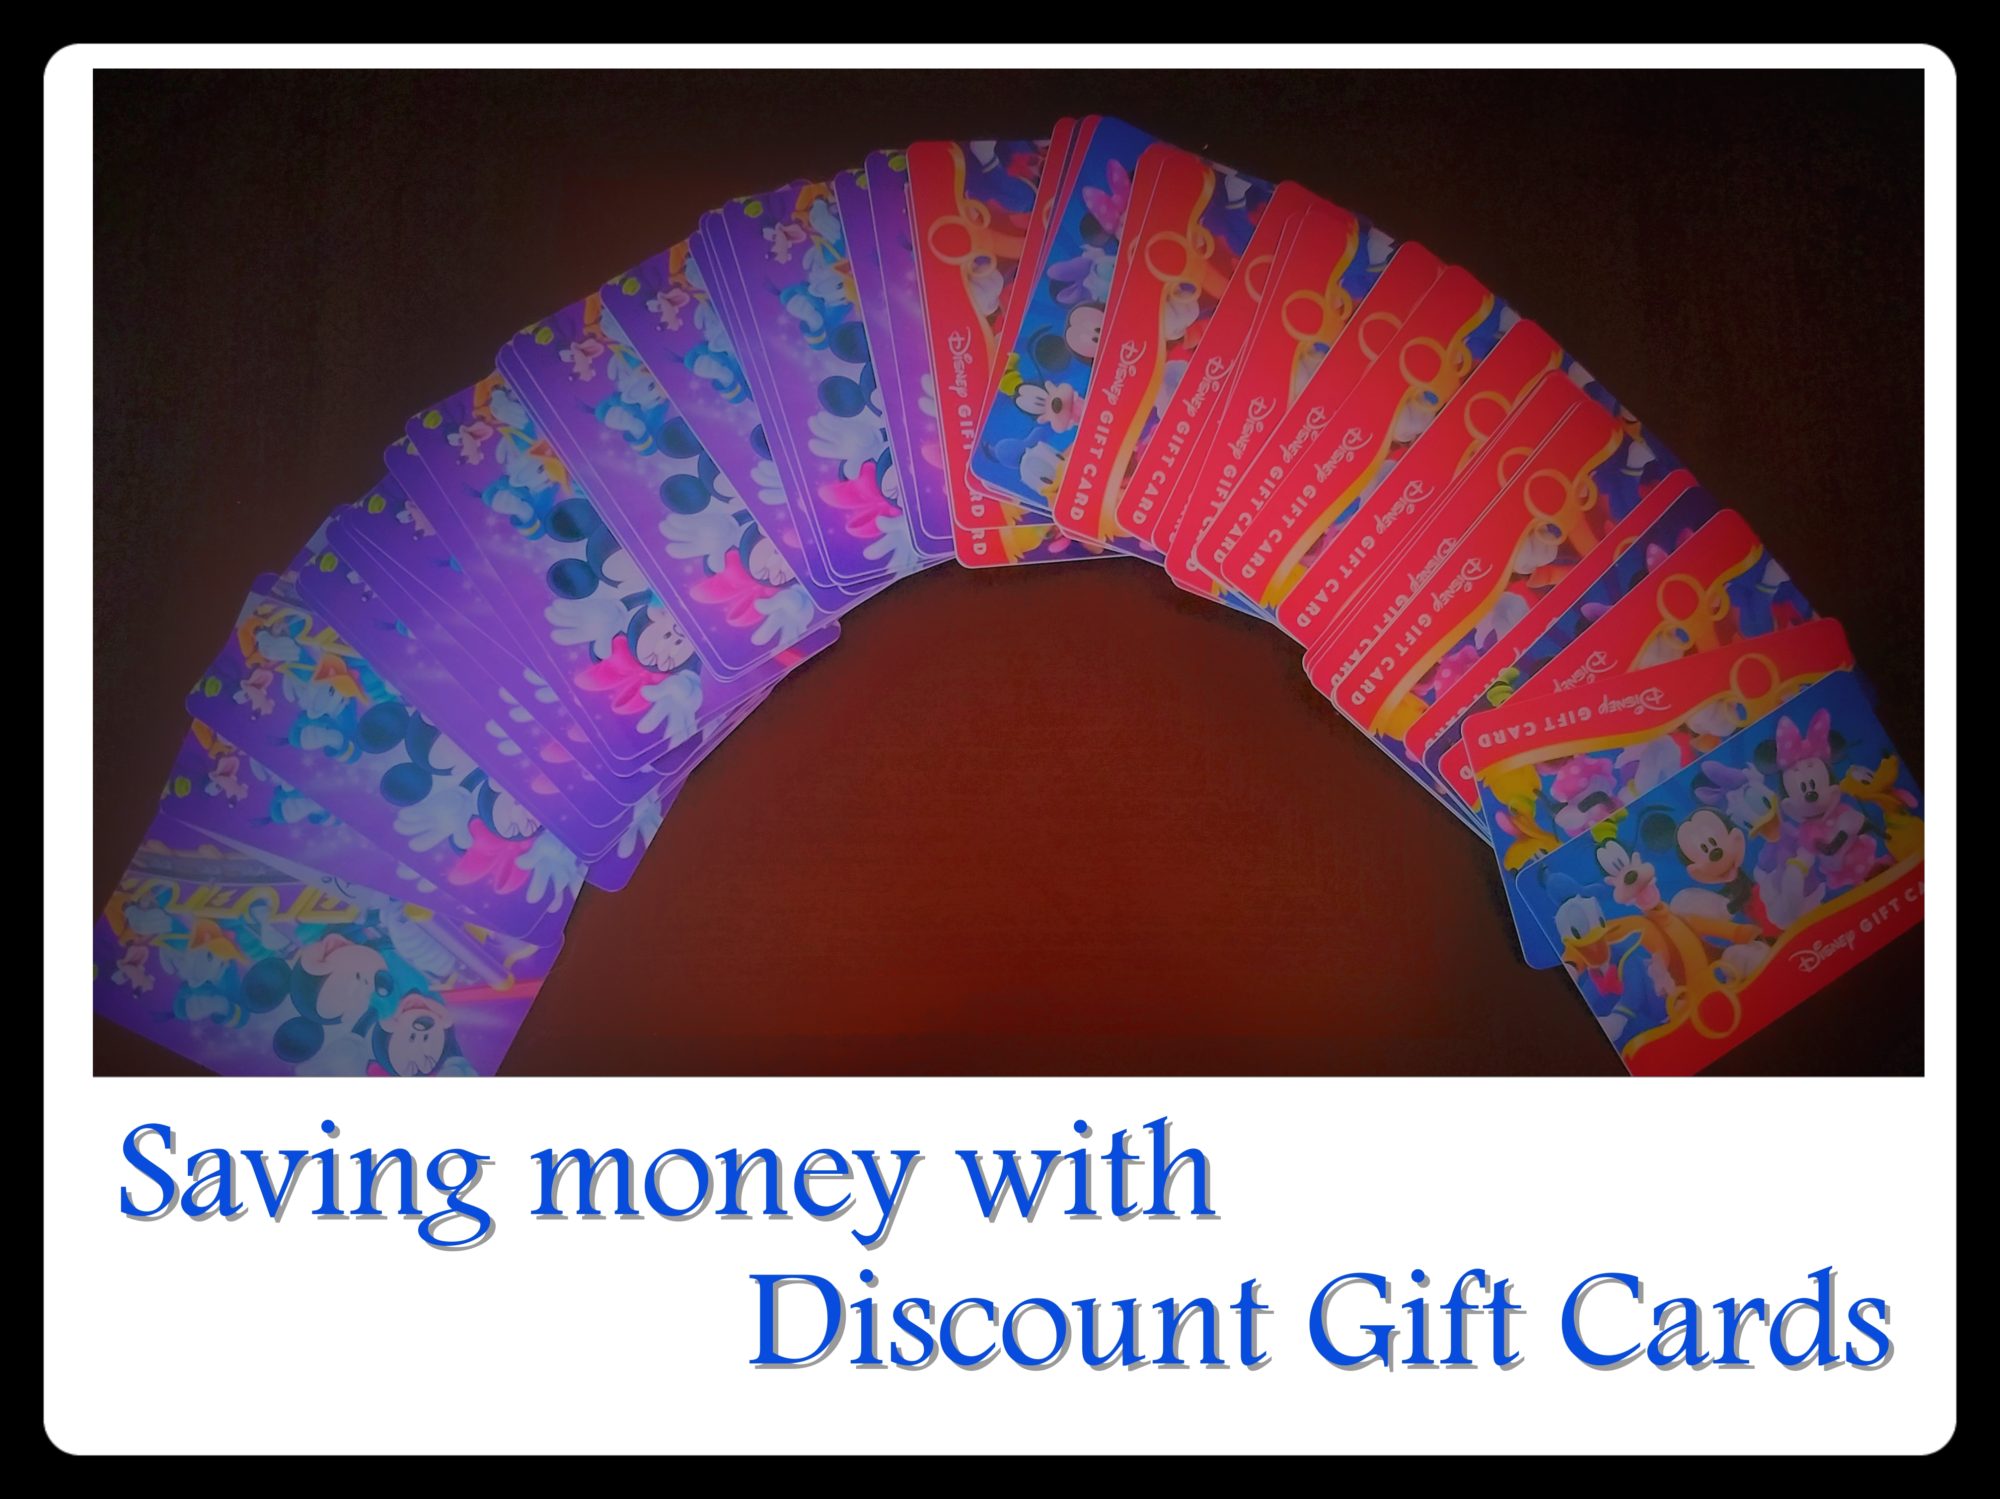 Saving money by buying discount gift cards